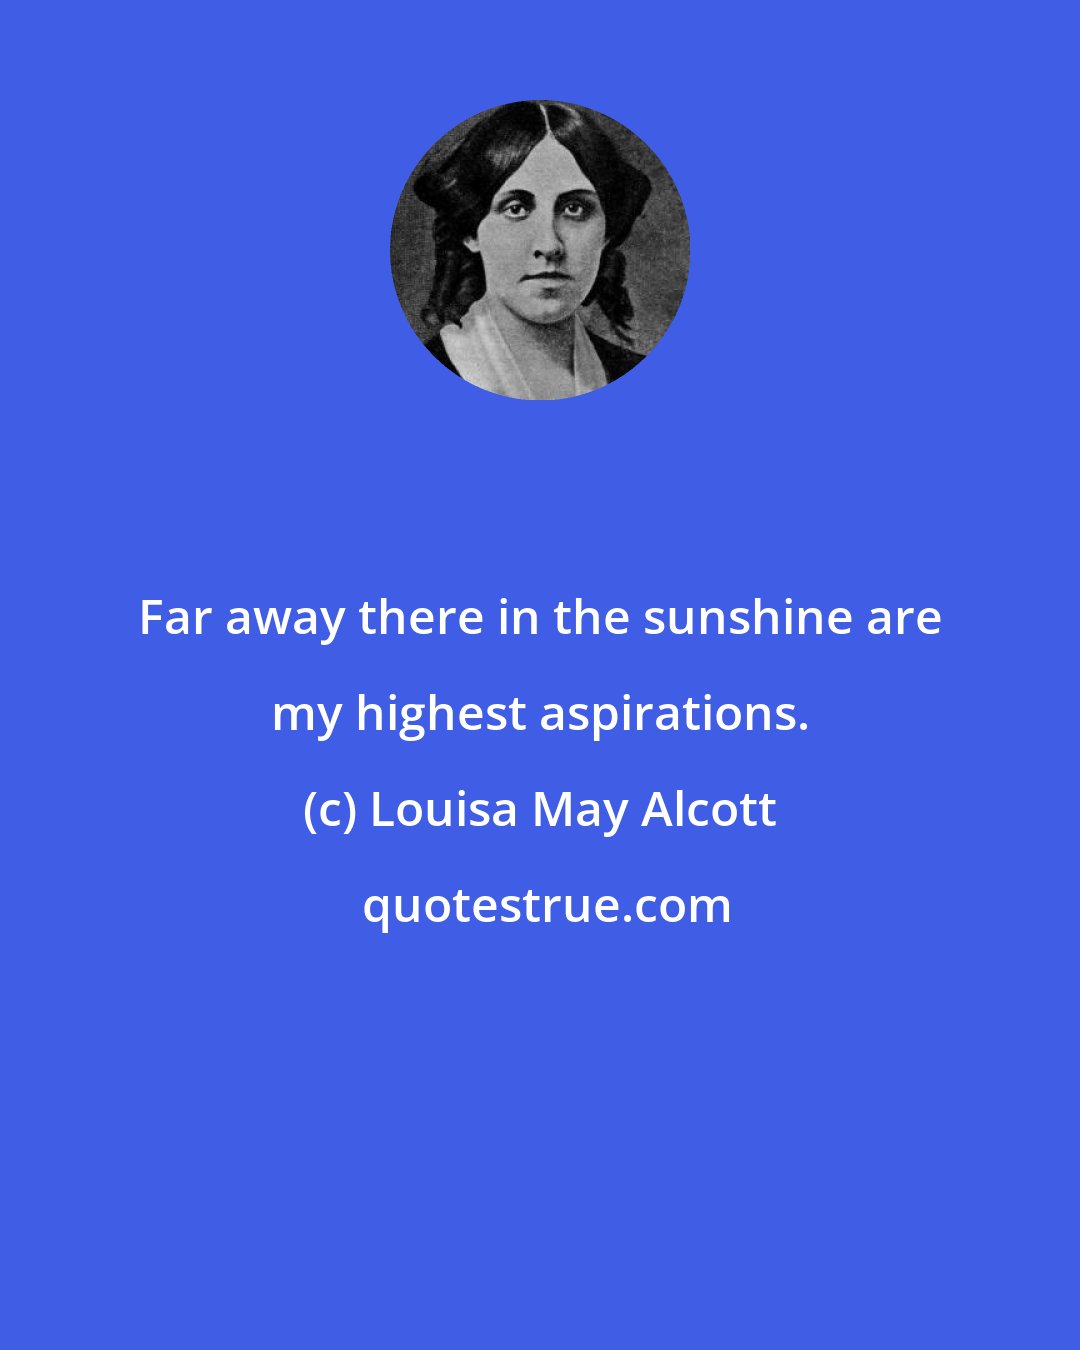 Louisa May Alcott: Far away there in the sunshine are my highest aspirations.